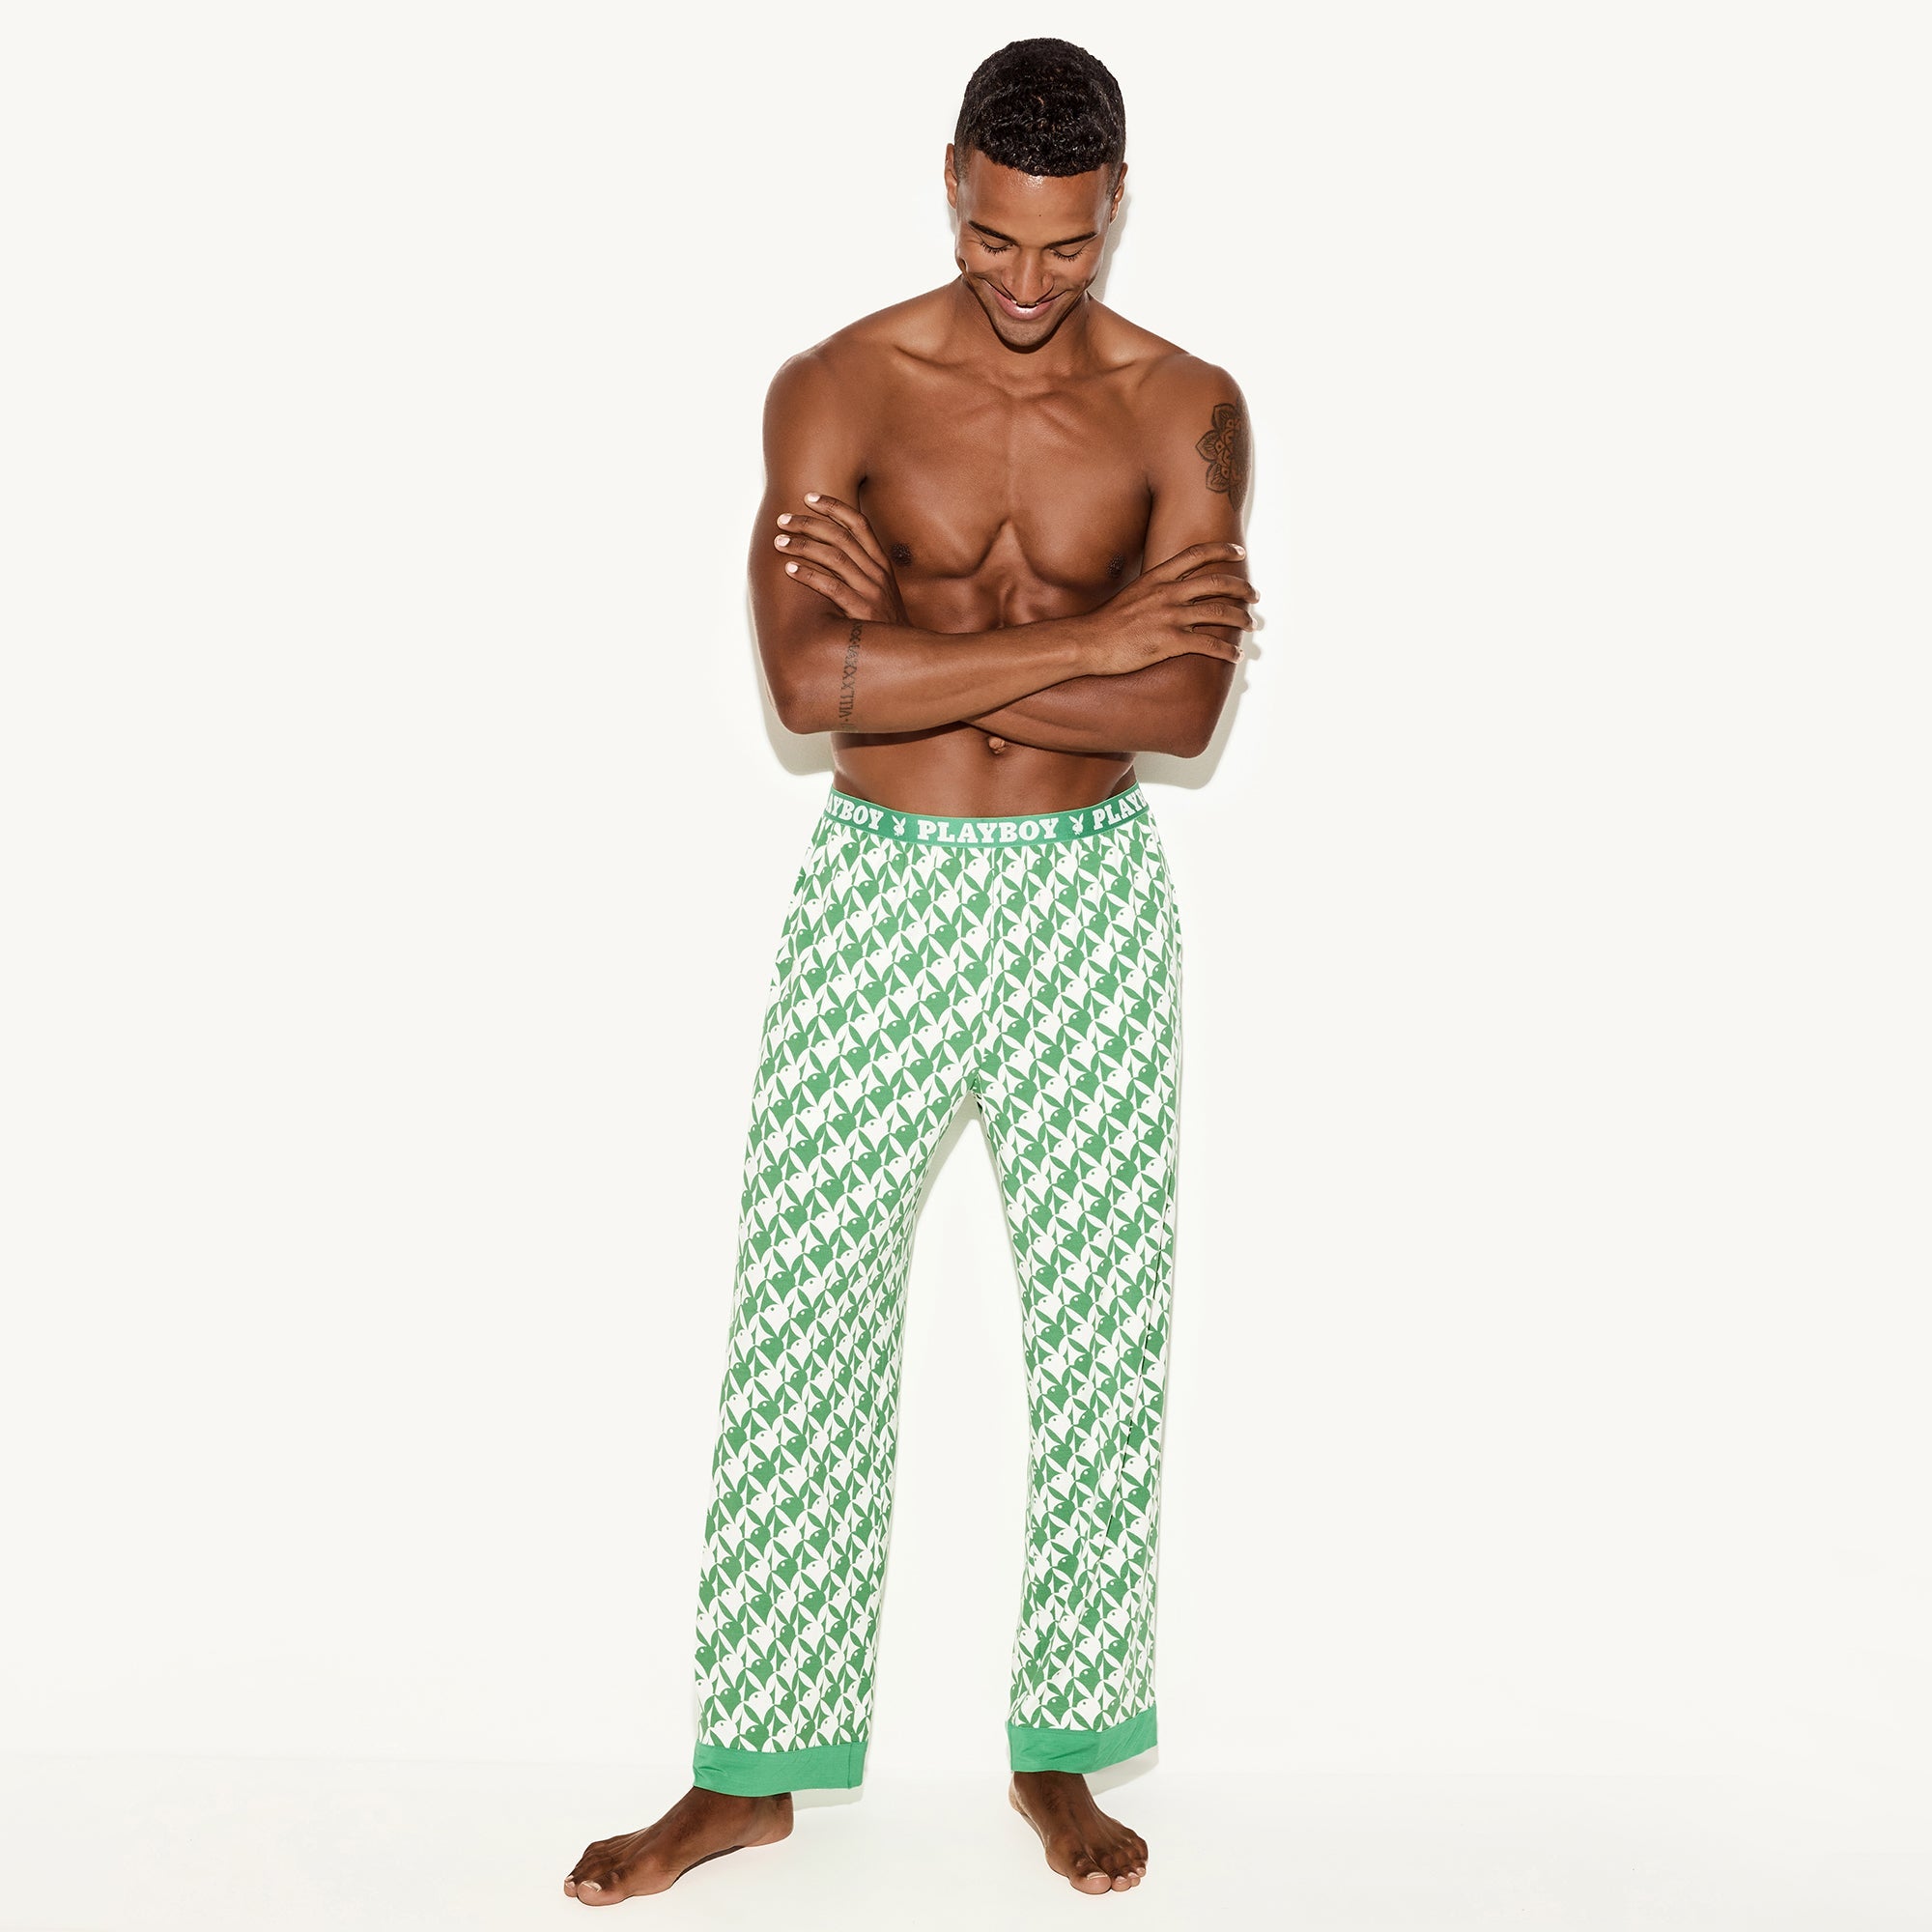 Introducing Playboy's New Men's Intimates & Velour Collection